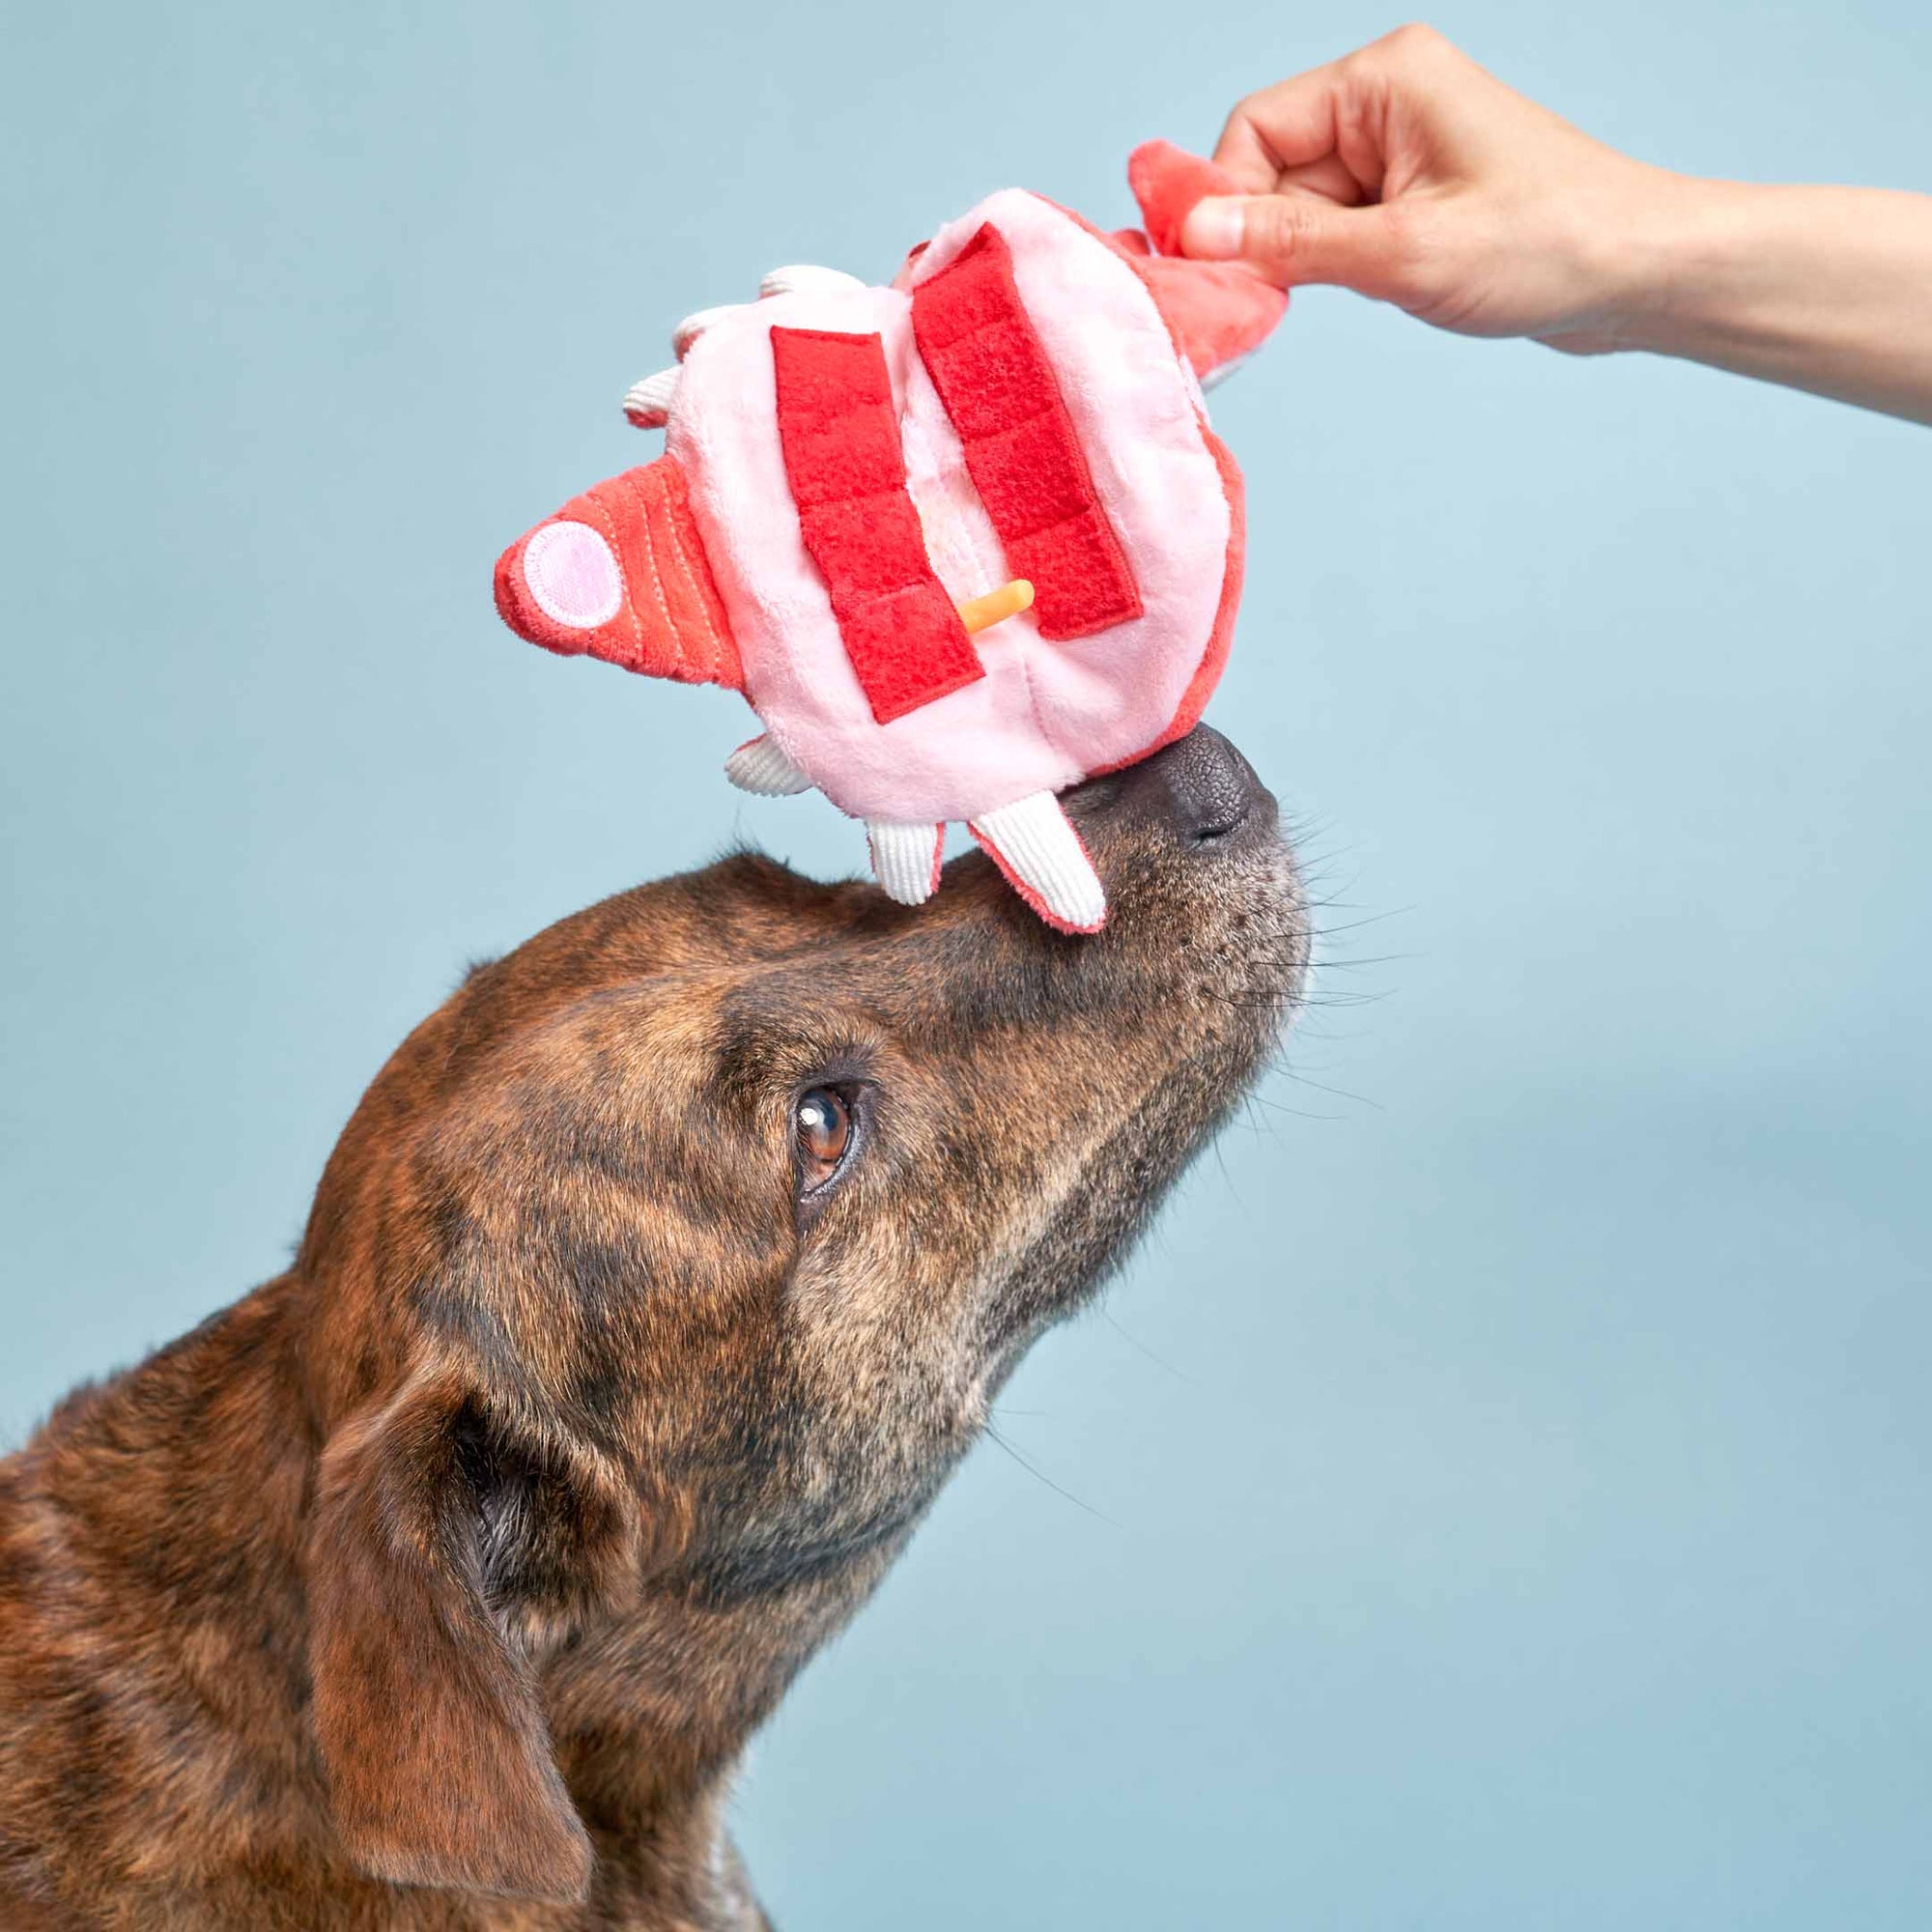 In the image, we see the brindle-coated dog gazing upwards as a human hand is placing the plush red crab toy on the dog's head. The dog's expression is attentive and patient, possibly waiting for a command or the next step in the game. This kind of training exercise is common in building discipline and focus in dogs, often used in conjunction with positive reinforcement. The soft blue background keeps the focus on the interaction between the dog, the toy, and the person involved in the activity.